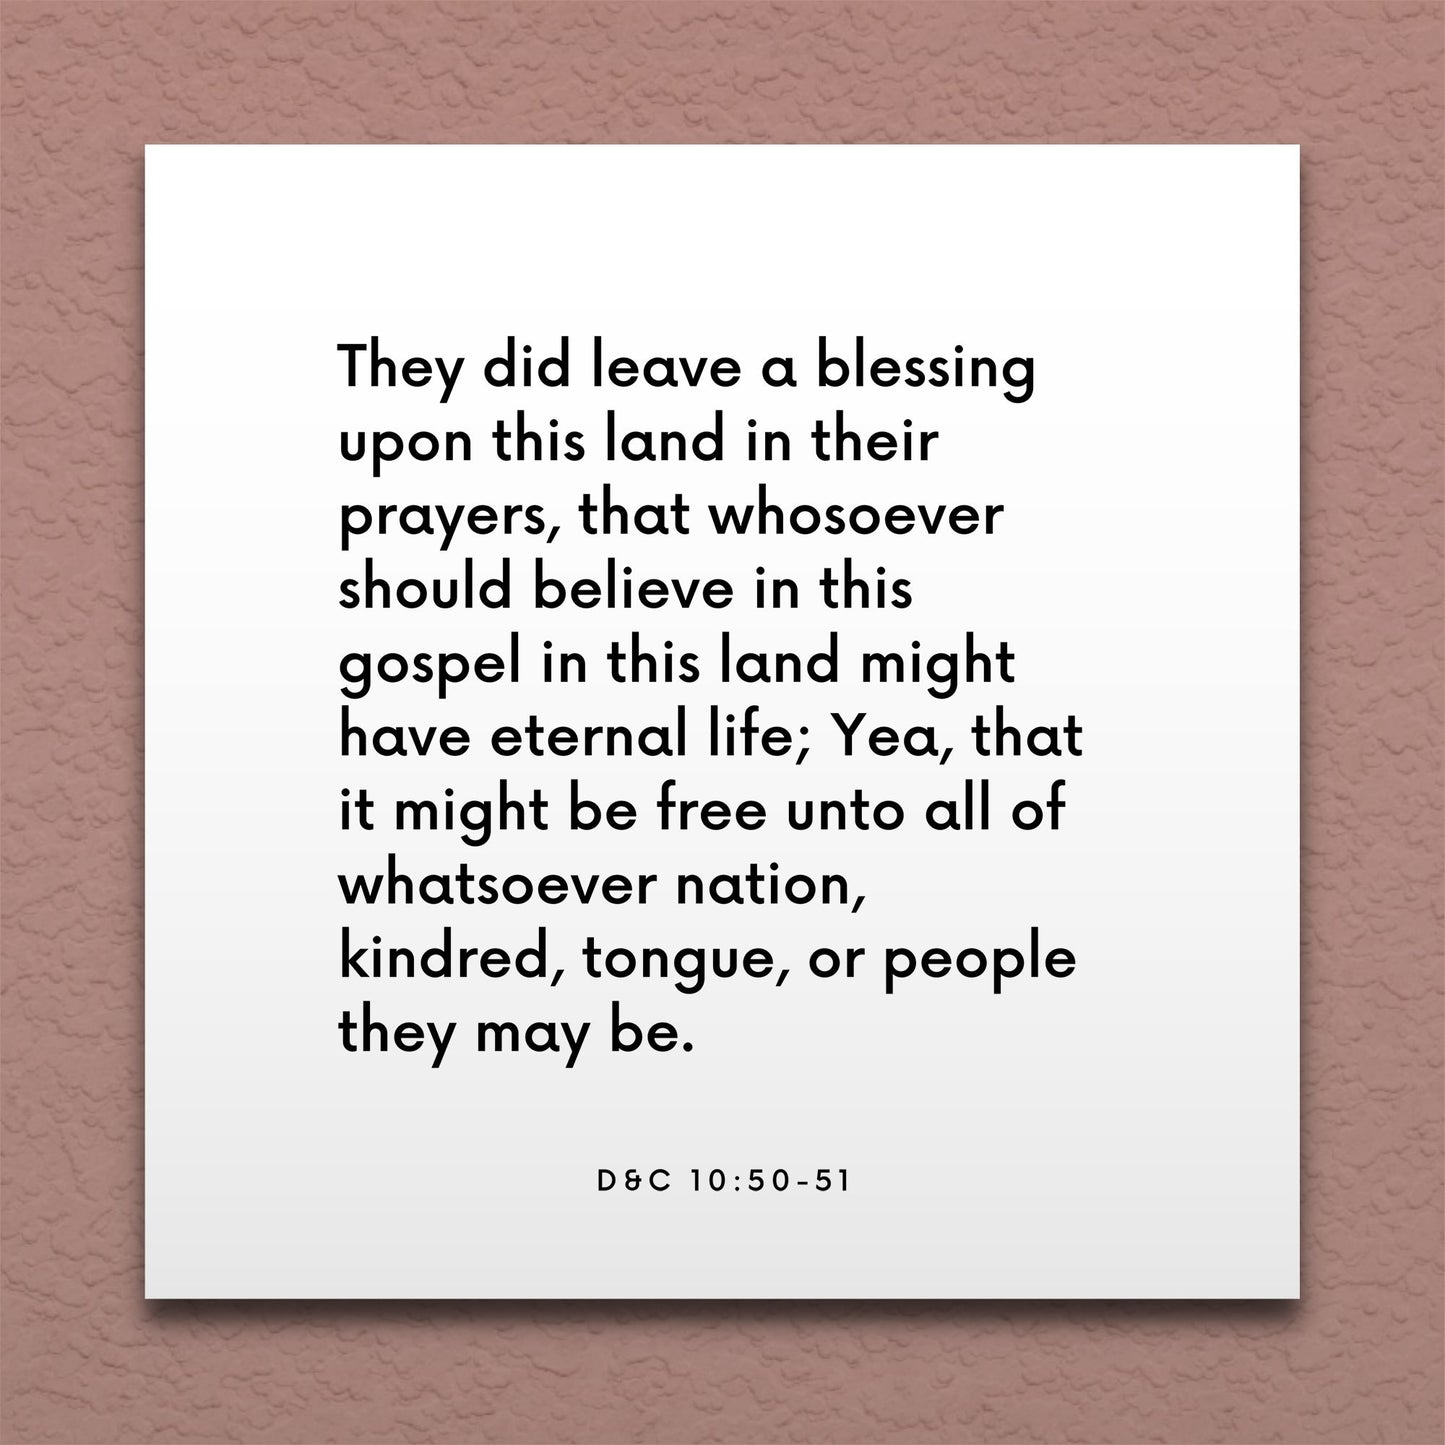 Wall-mounted scripture tile for D&C 10:50-51 - "They did leave a blessing upon this land in their prayers"